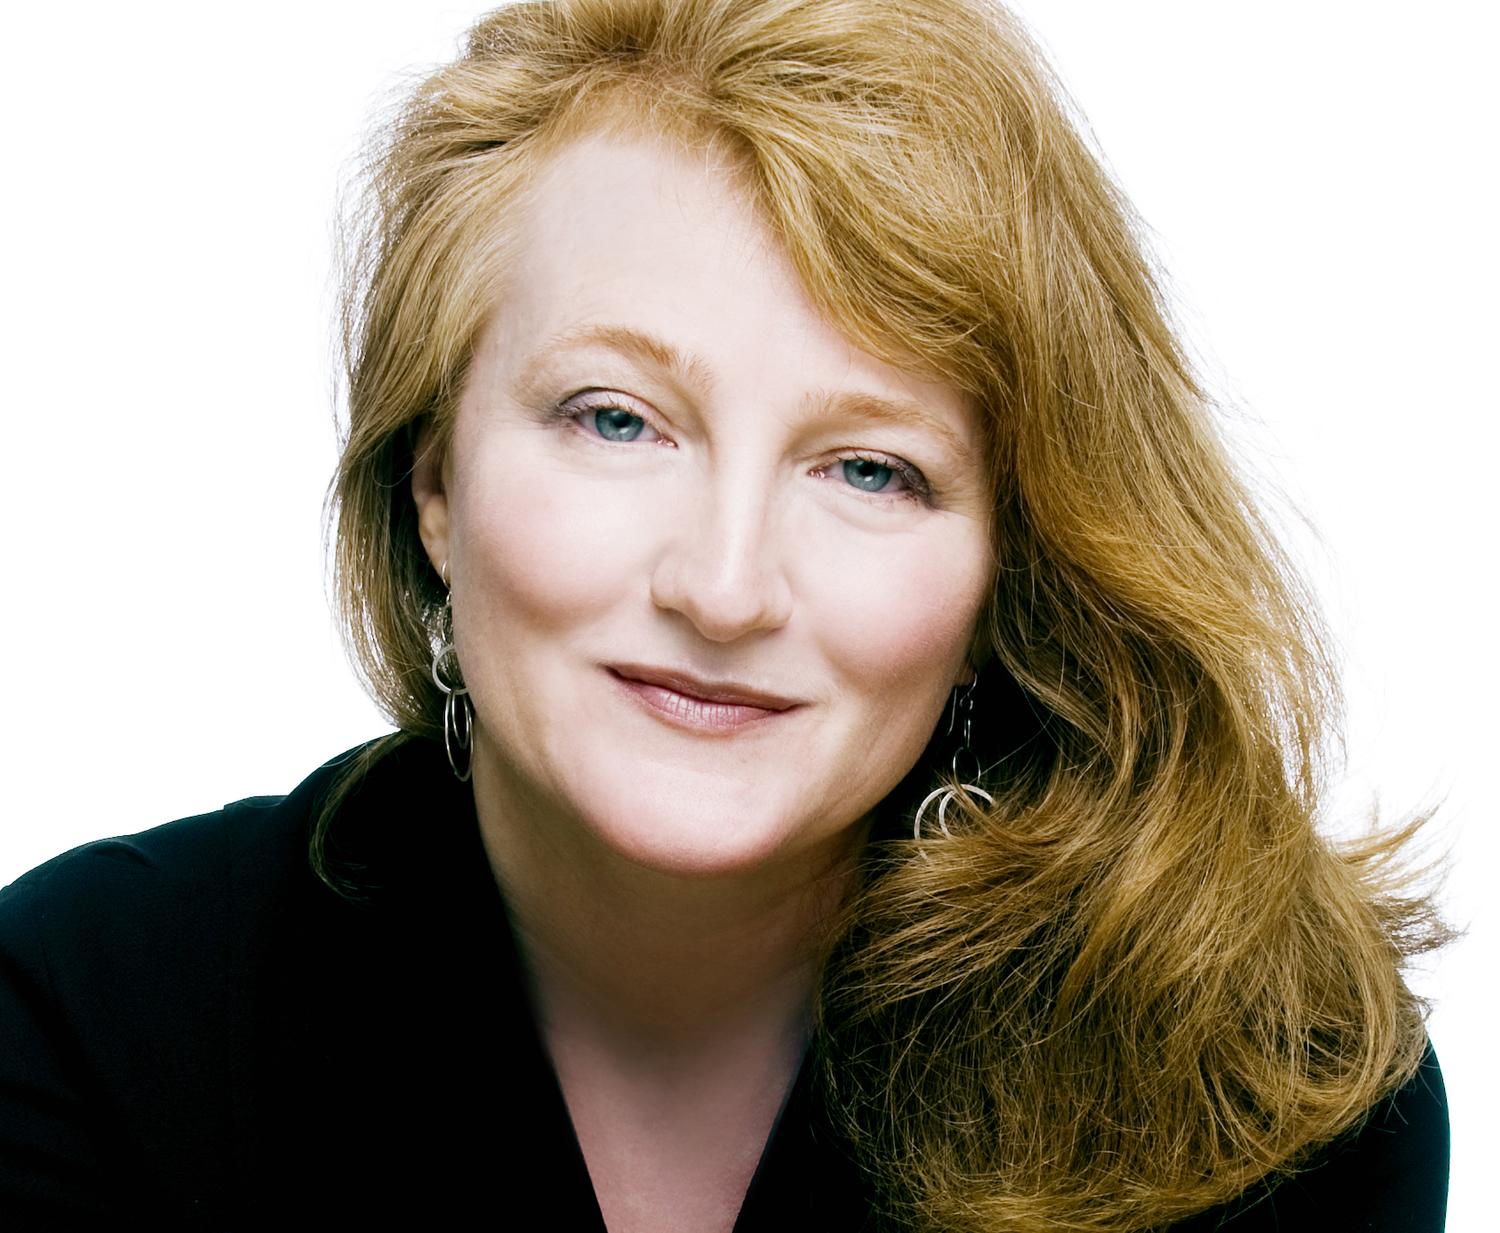 Krista Tippett Live: Discovering the Cosmology of Bach